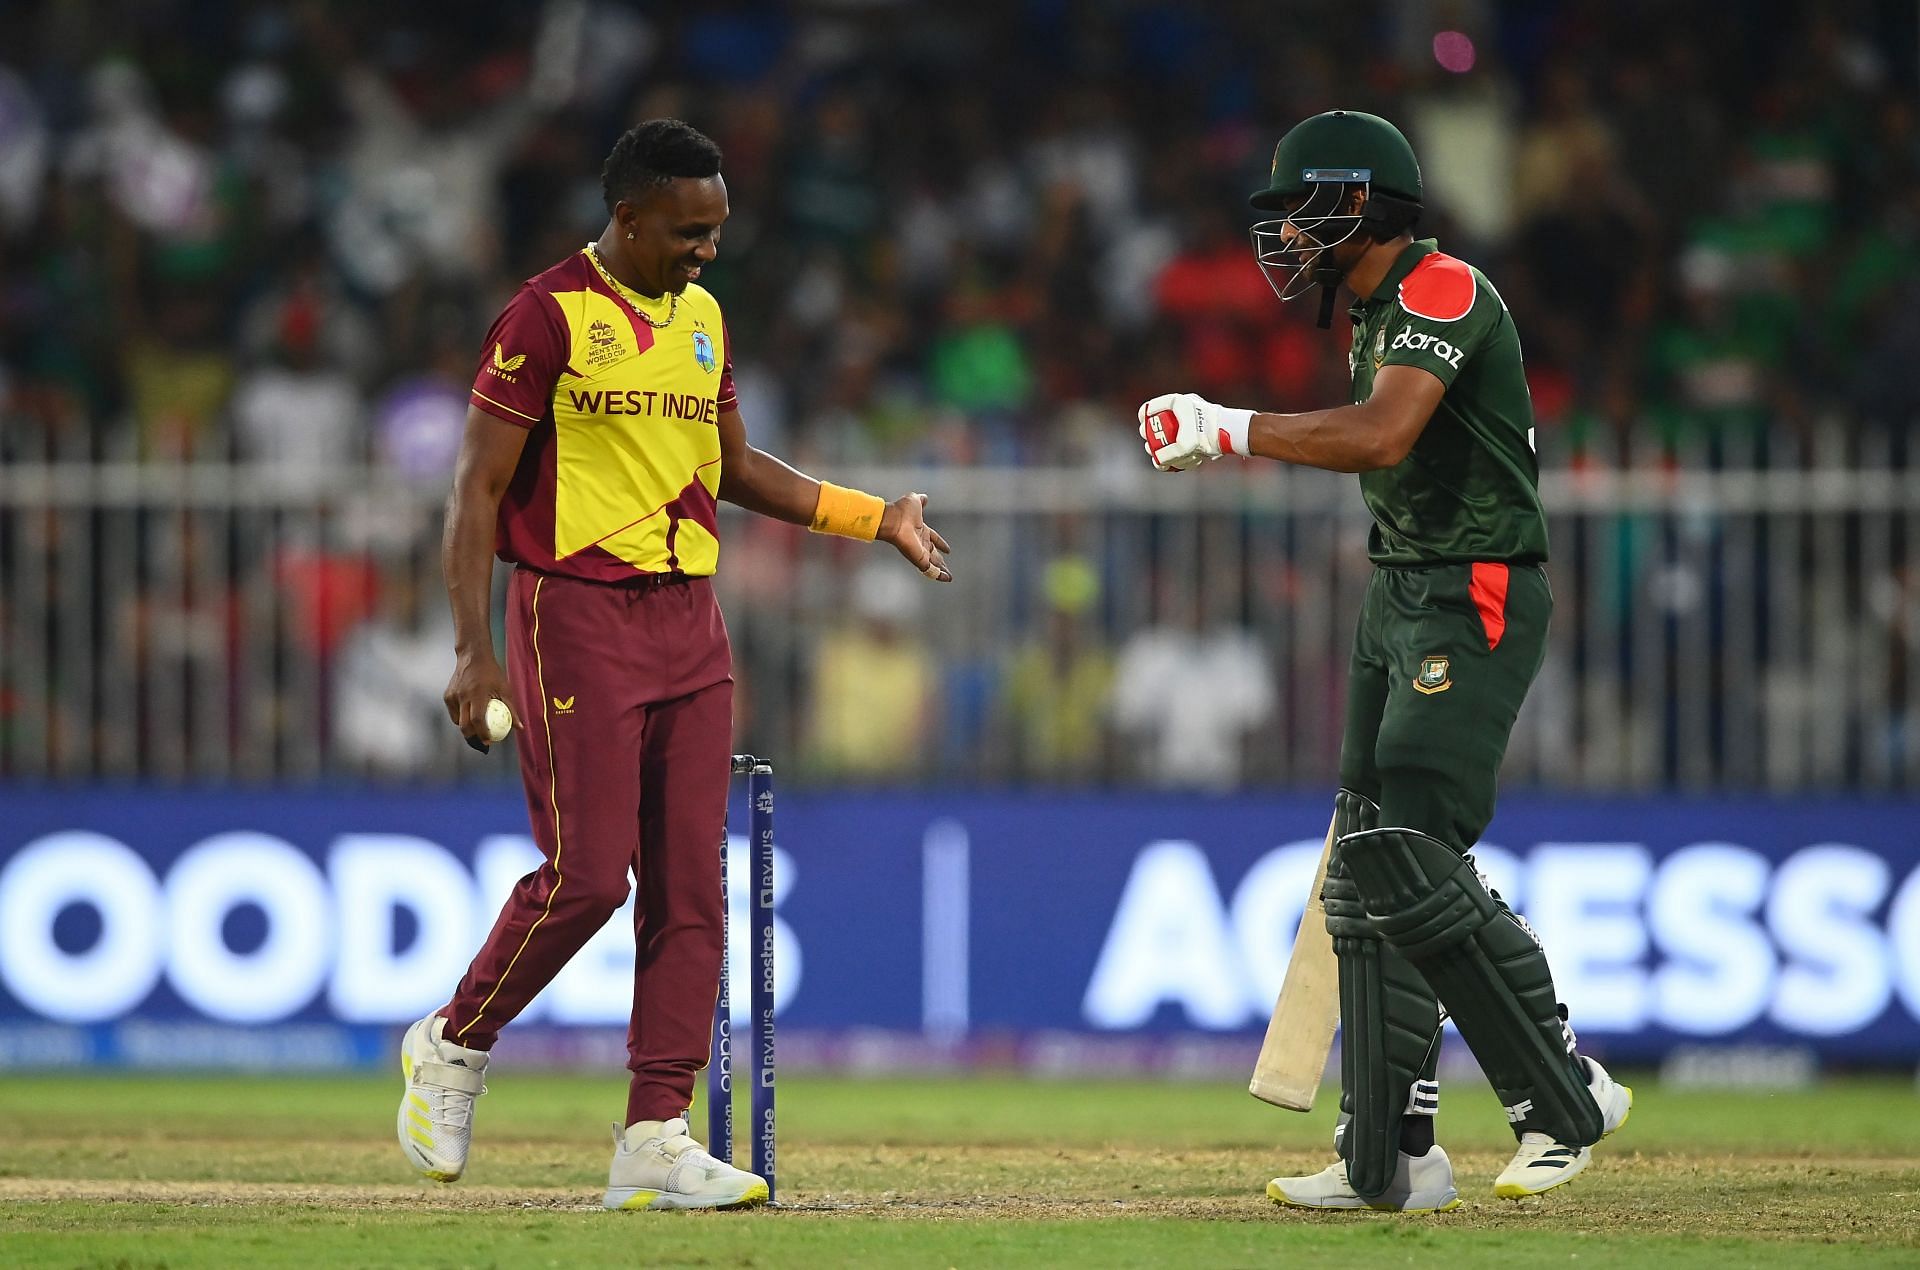 Abu Dhabi T10 League 2021-22 Delhi Bulls vs The Chennai Braves Probable XIs, Match prediction, Weather Forecast, Pitch Report, and Live Streaming Details